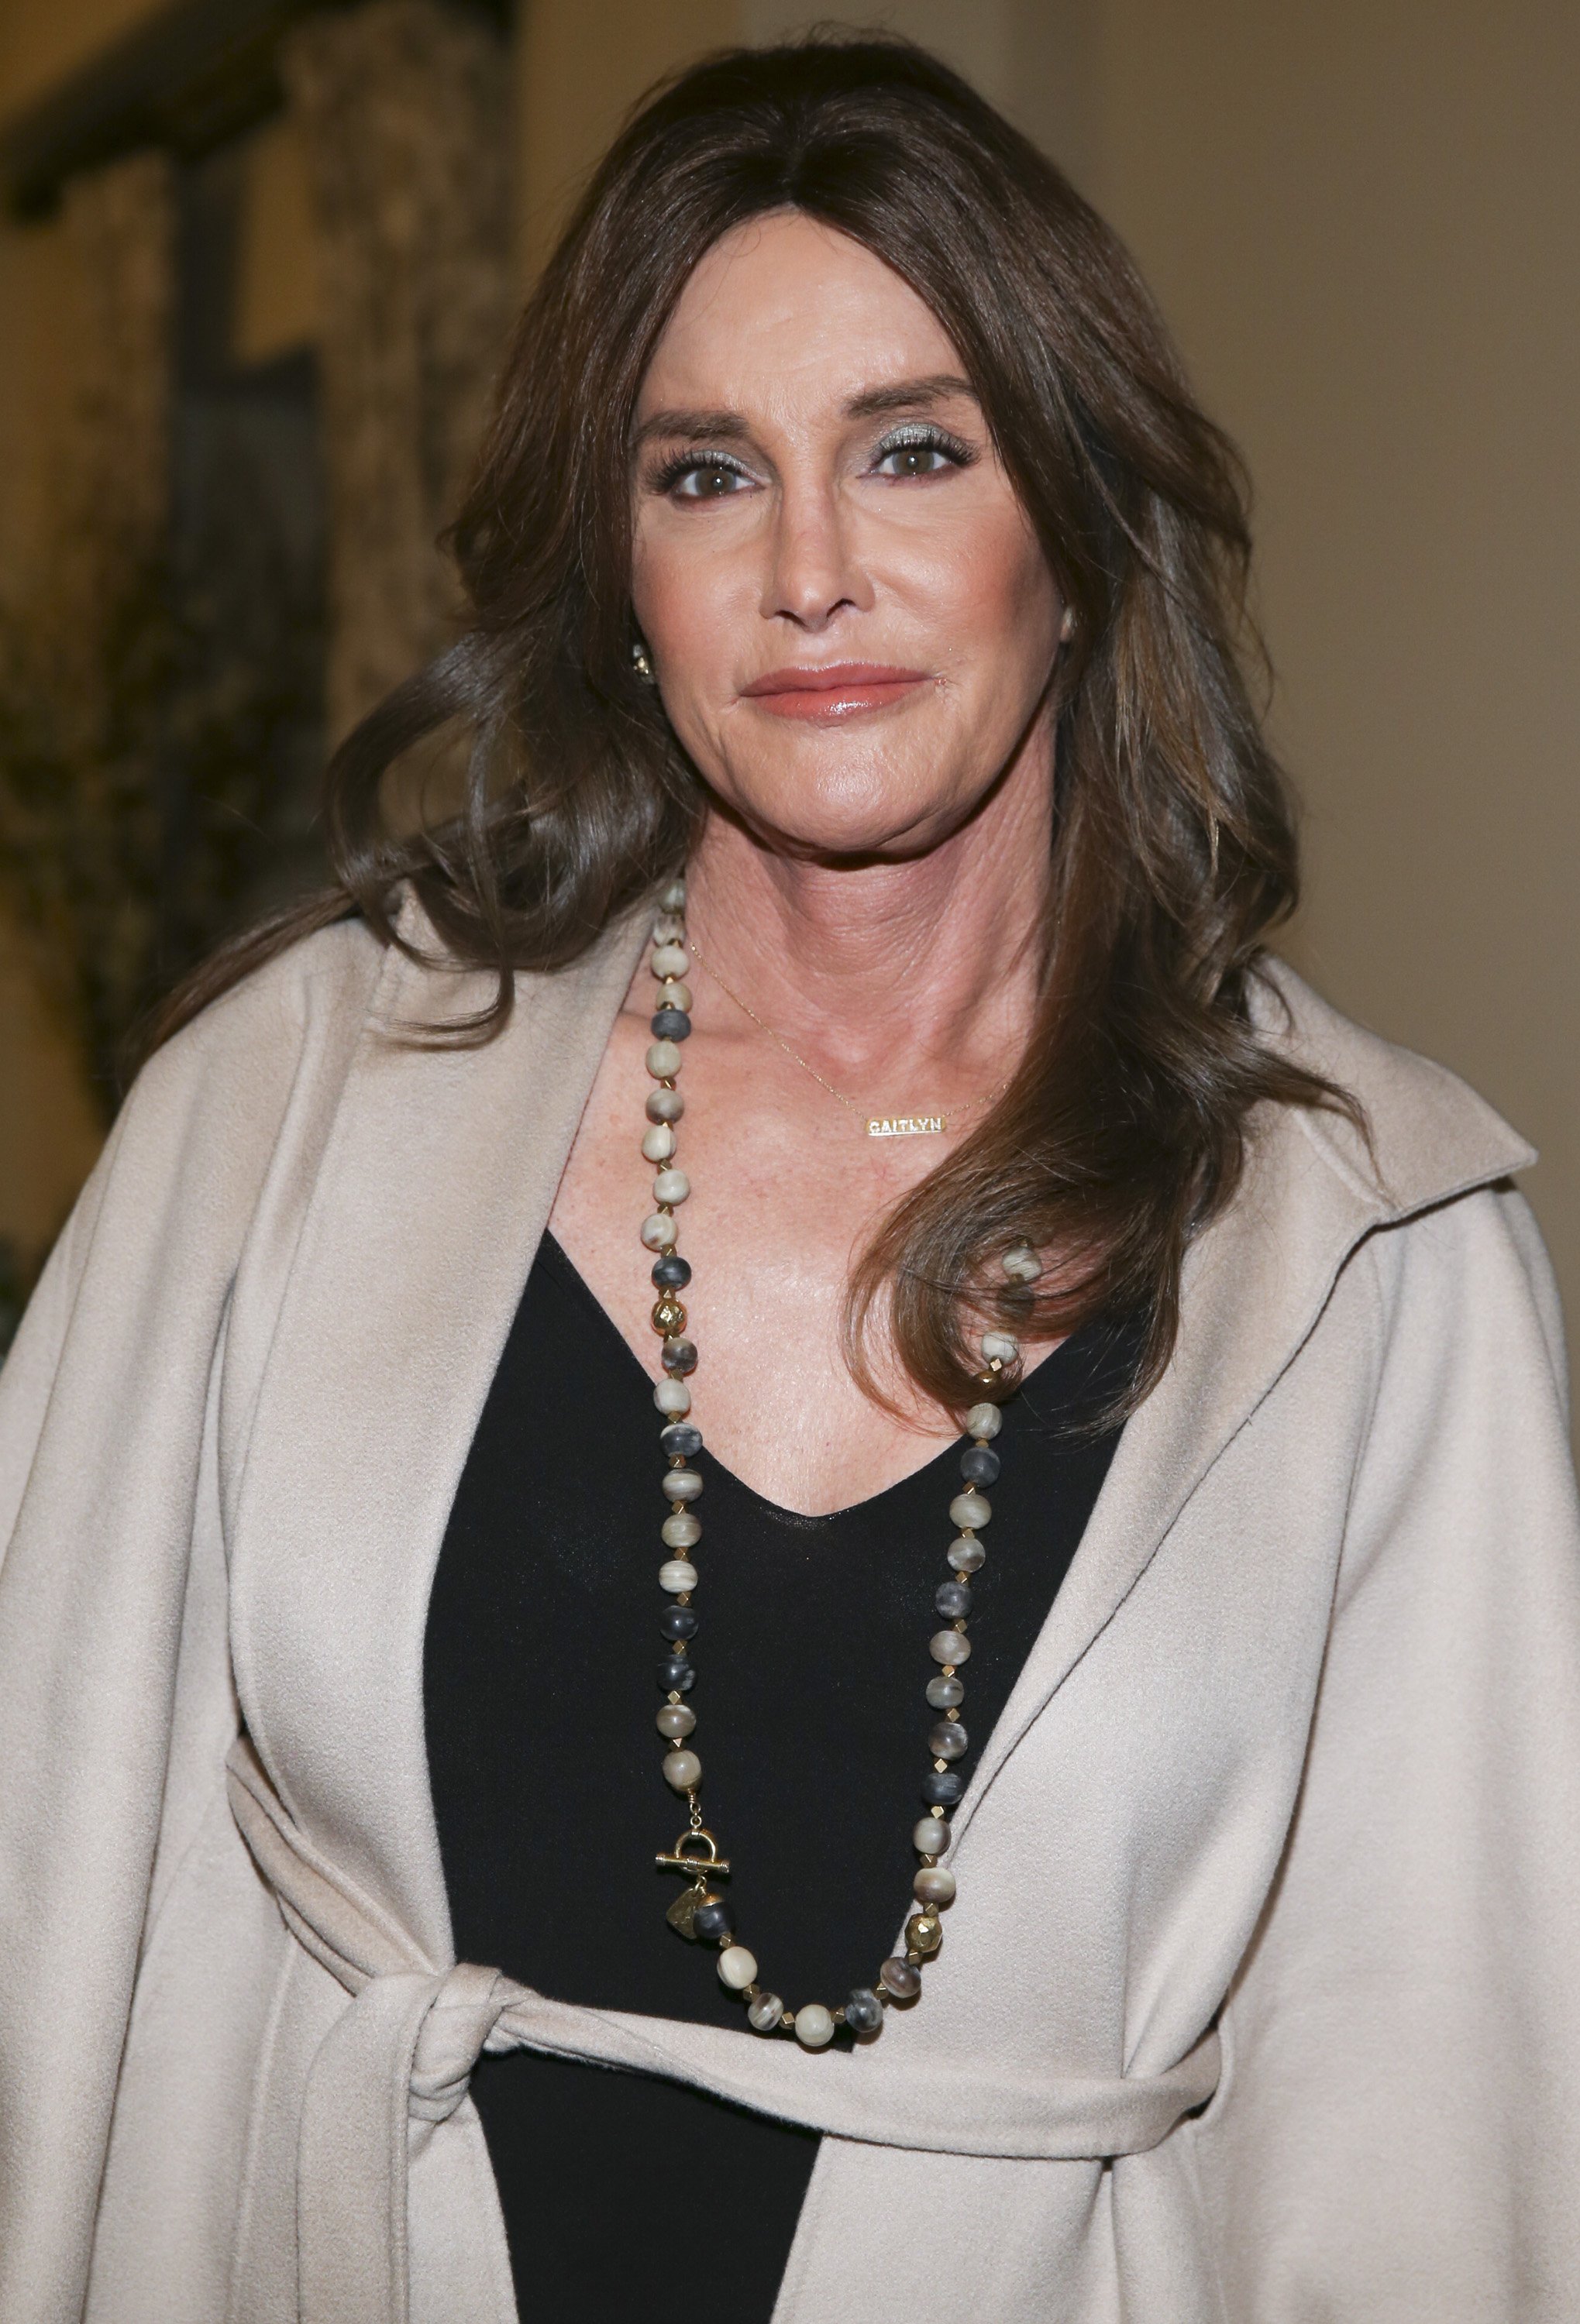 Caitlyn Jenner attends at the 2016 MAKERS Conference, Day 1 at the Terrenea Resort on February 1, 2016, in Rancho Palos Verdes, California. | Source: Getty Images.